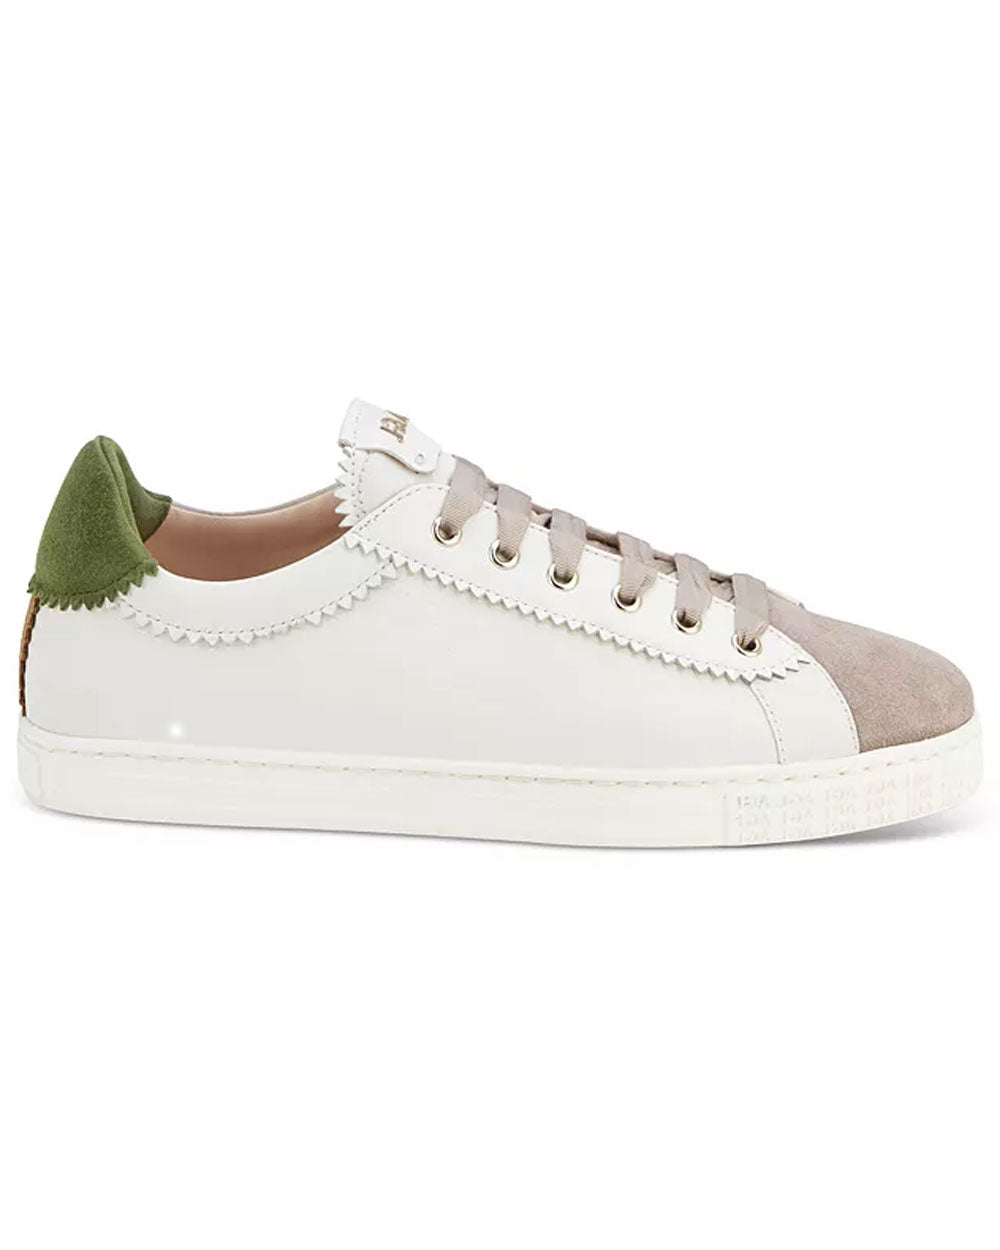 Sade Leather and Suede Sneaker in Olive